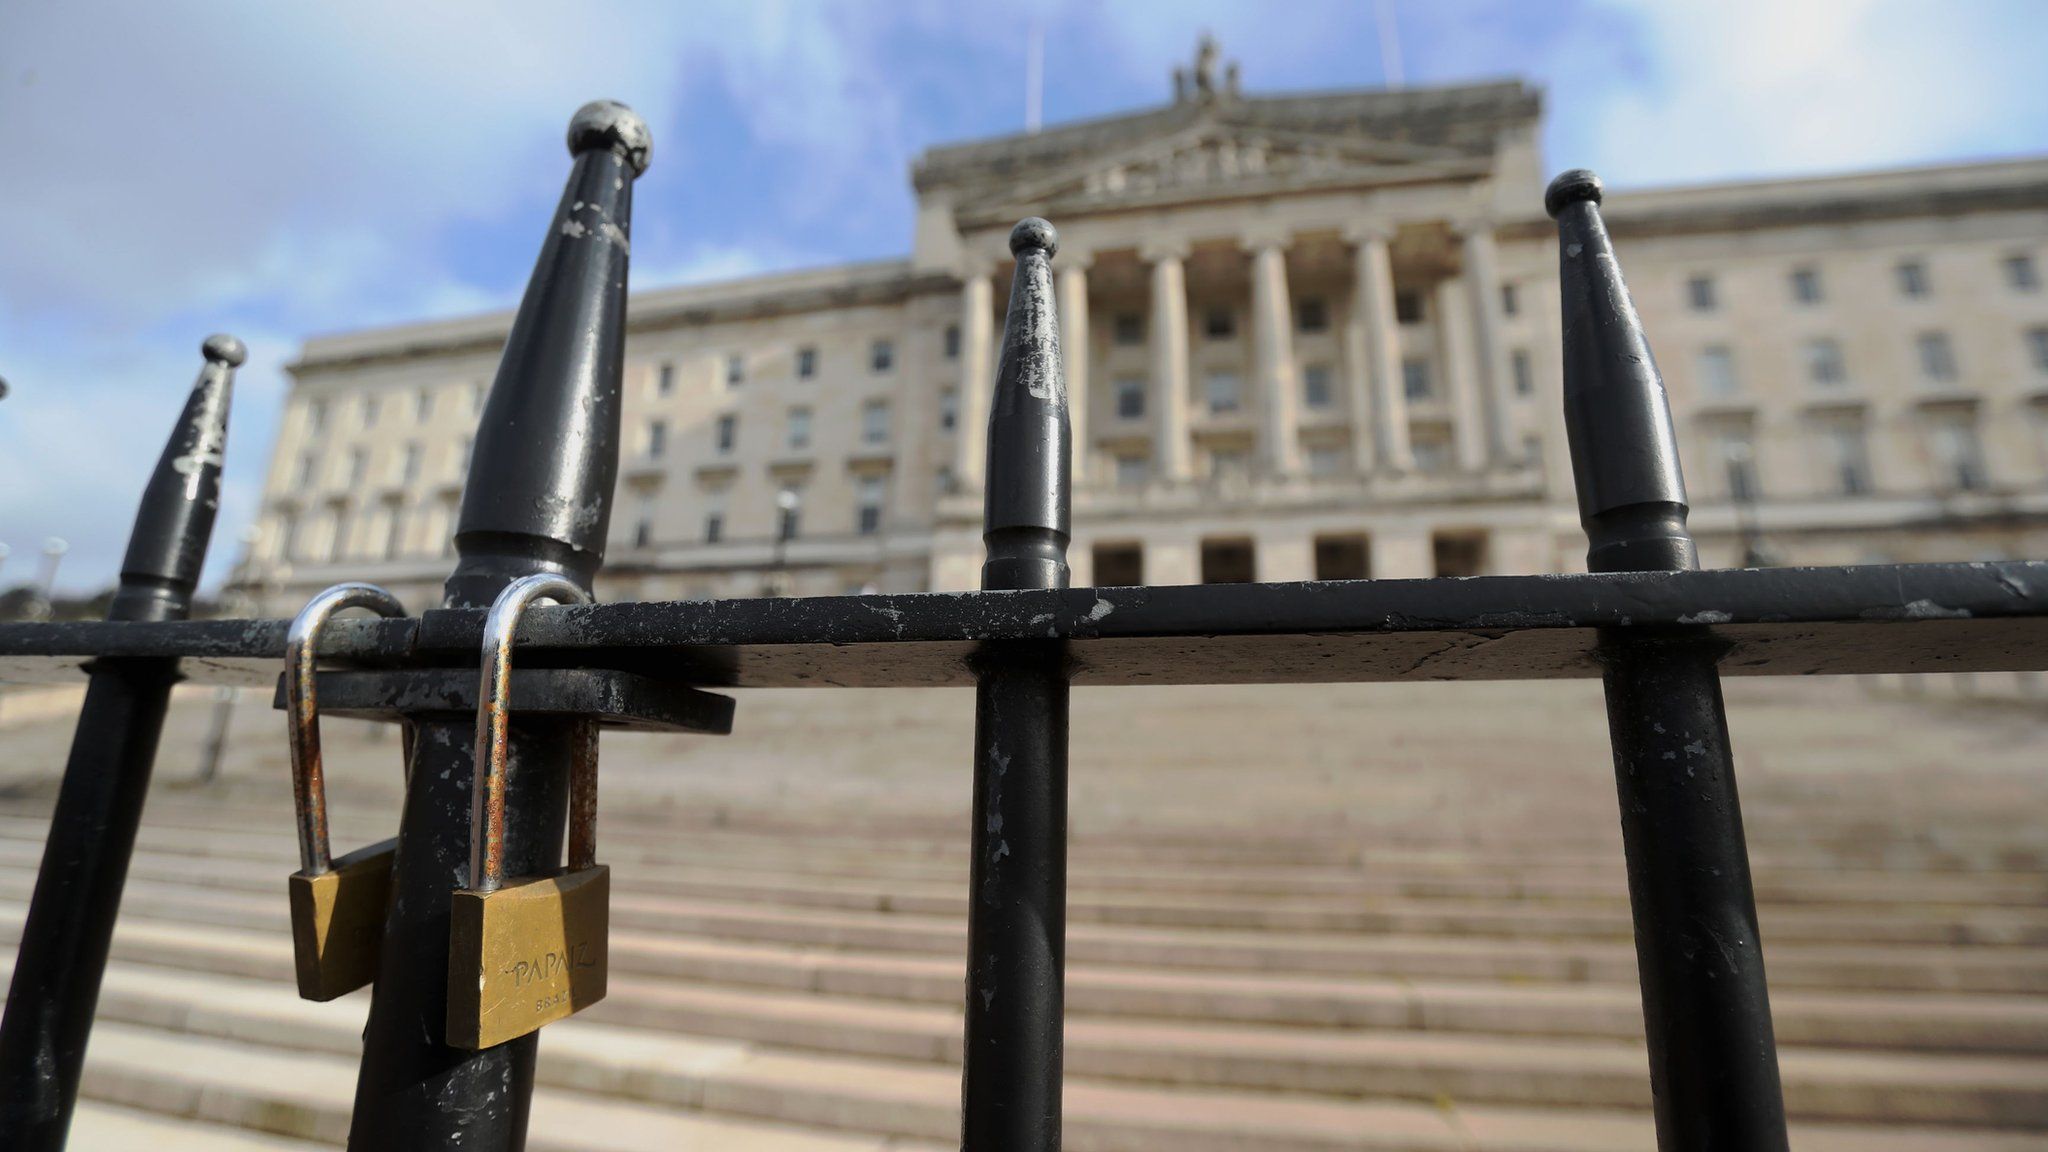 Parliament Buildings in the Stormont estate in Belfast, seen behind a locked gate